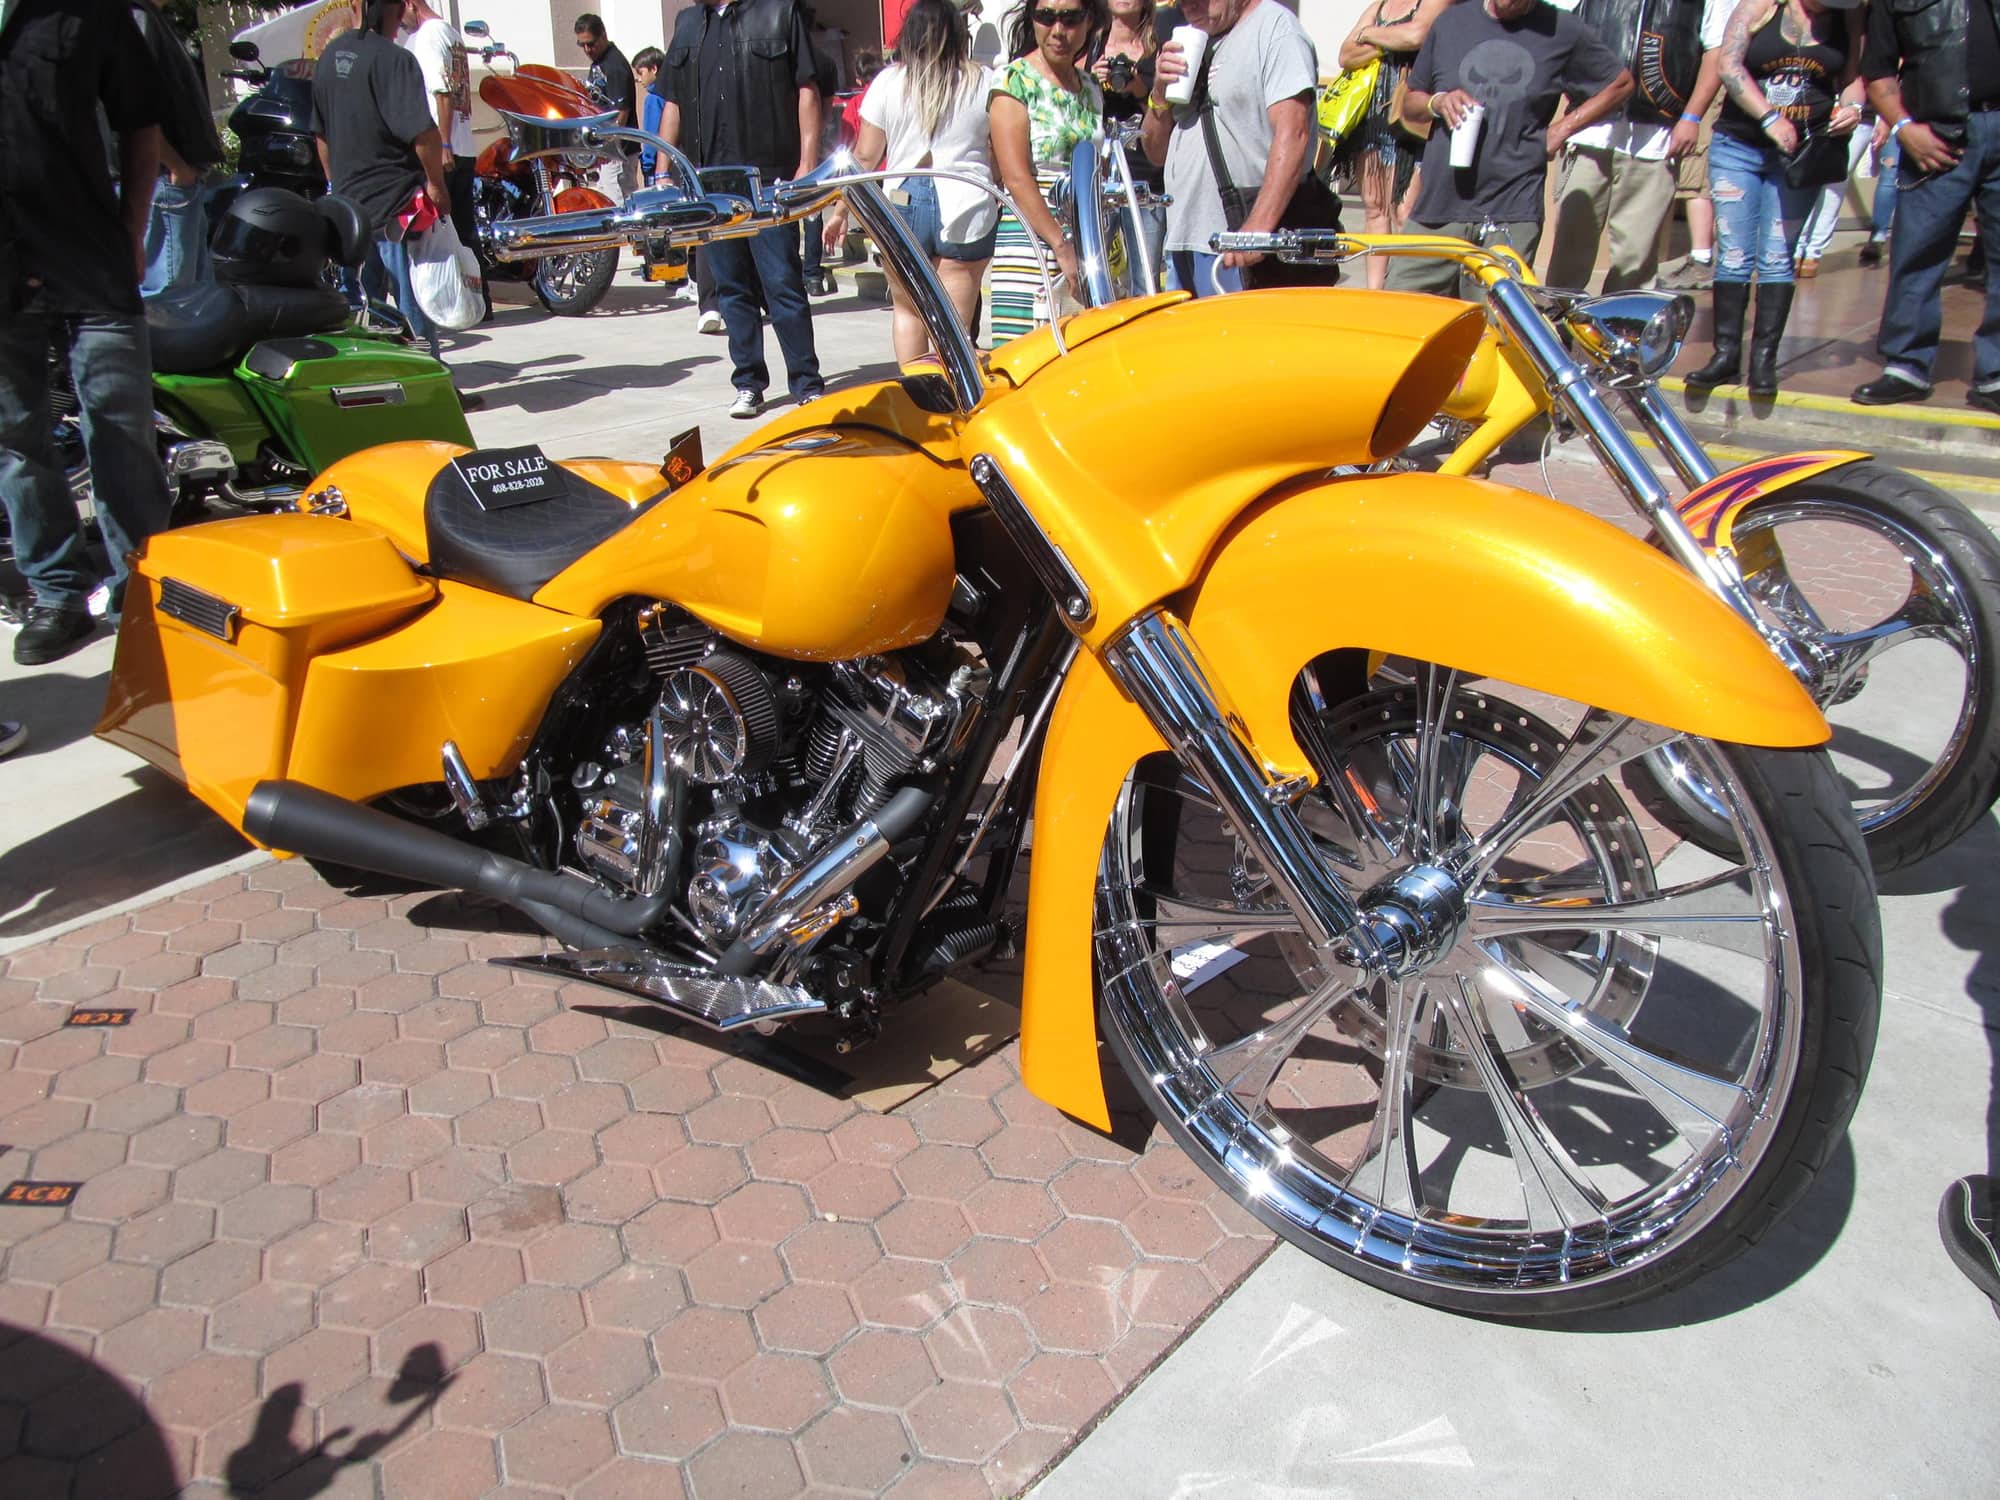 2016 Hollister Motorcycle Rally - Harley Davidson Forums